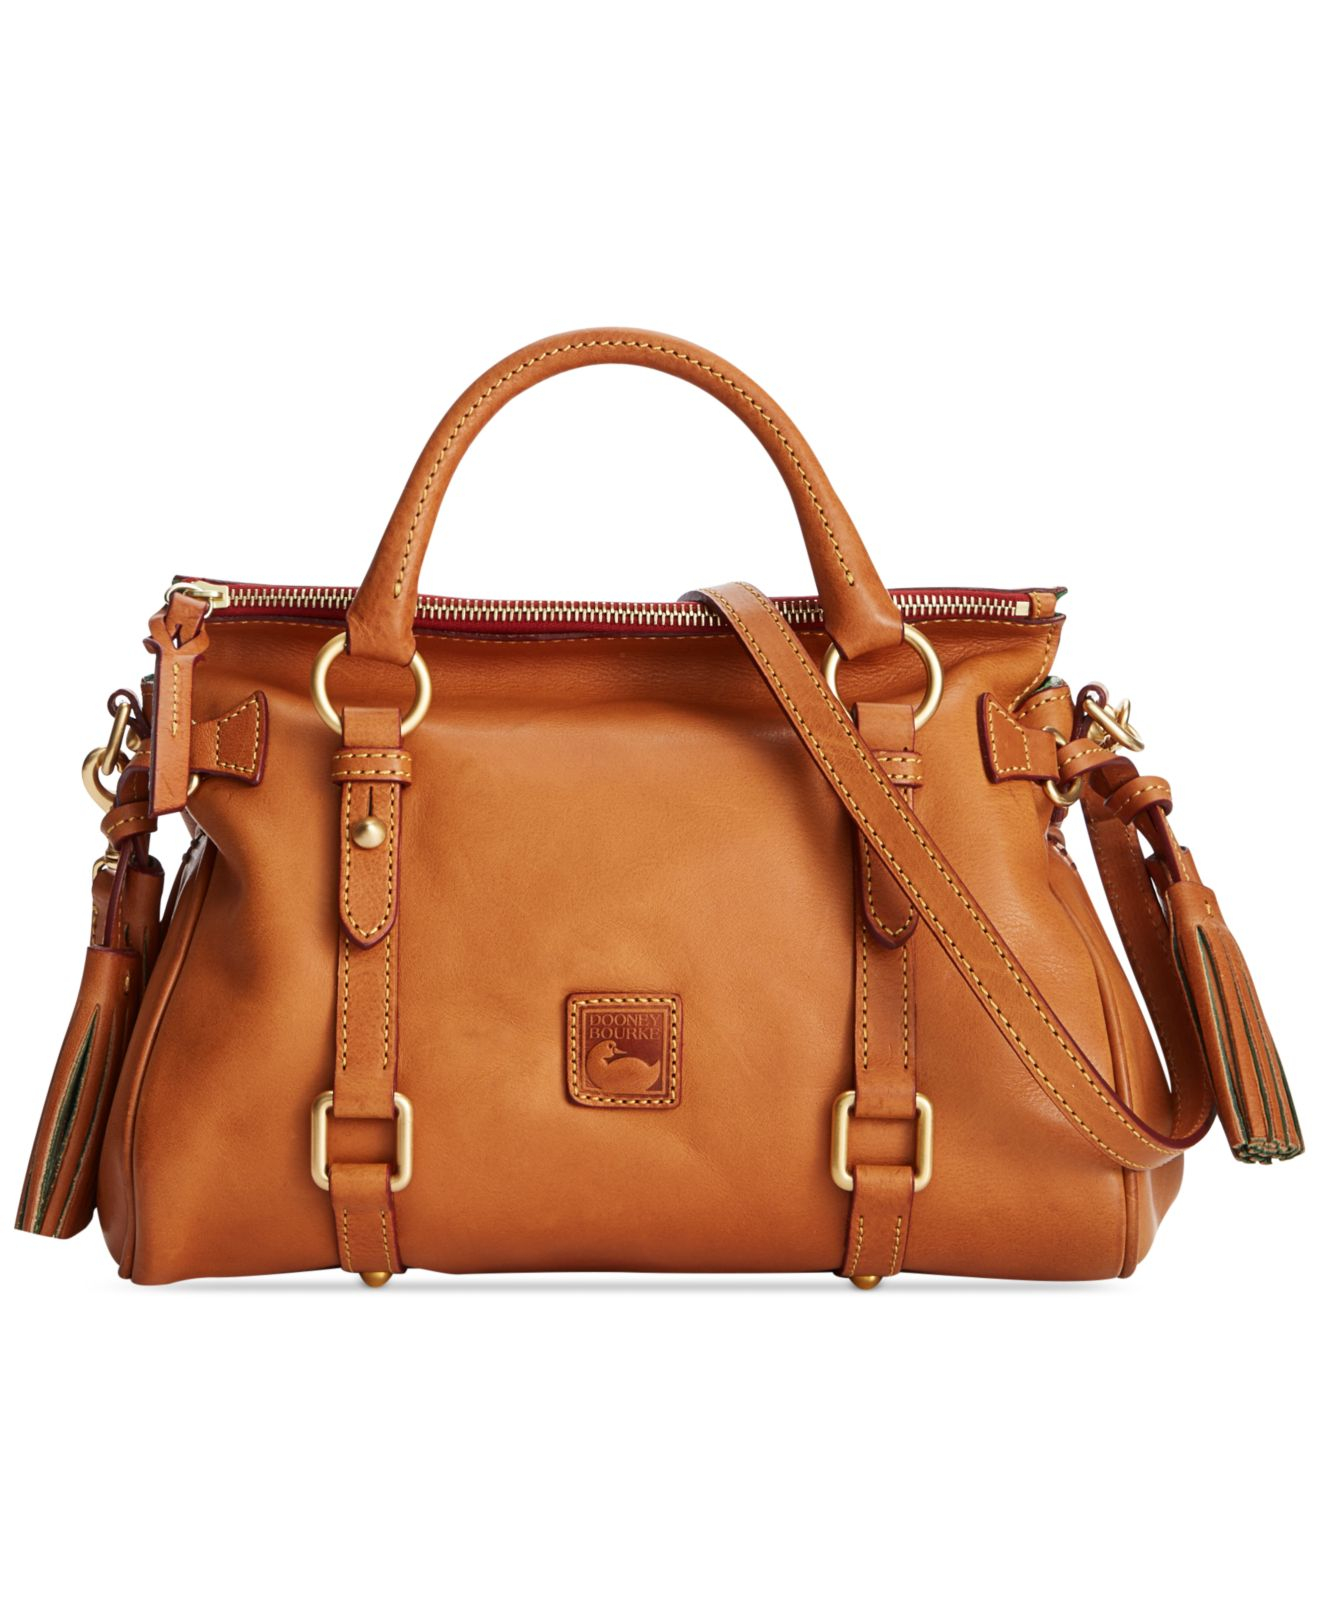 Dooney & Bourke Leather Florentine Small Satchel in Natural - Lyst